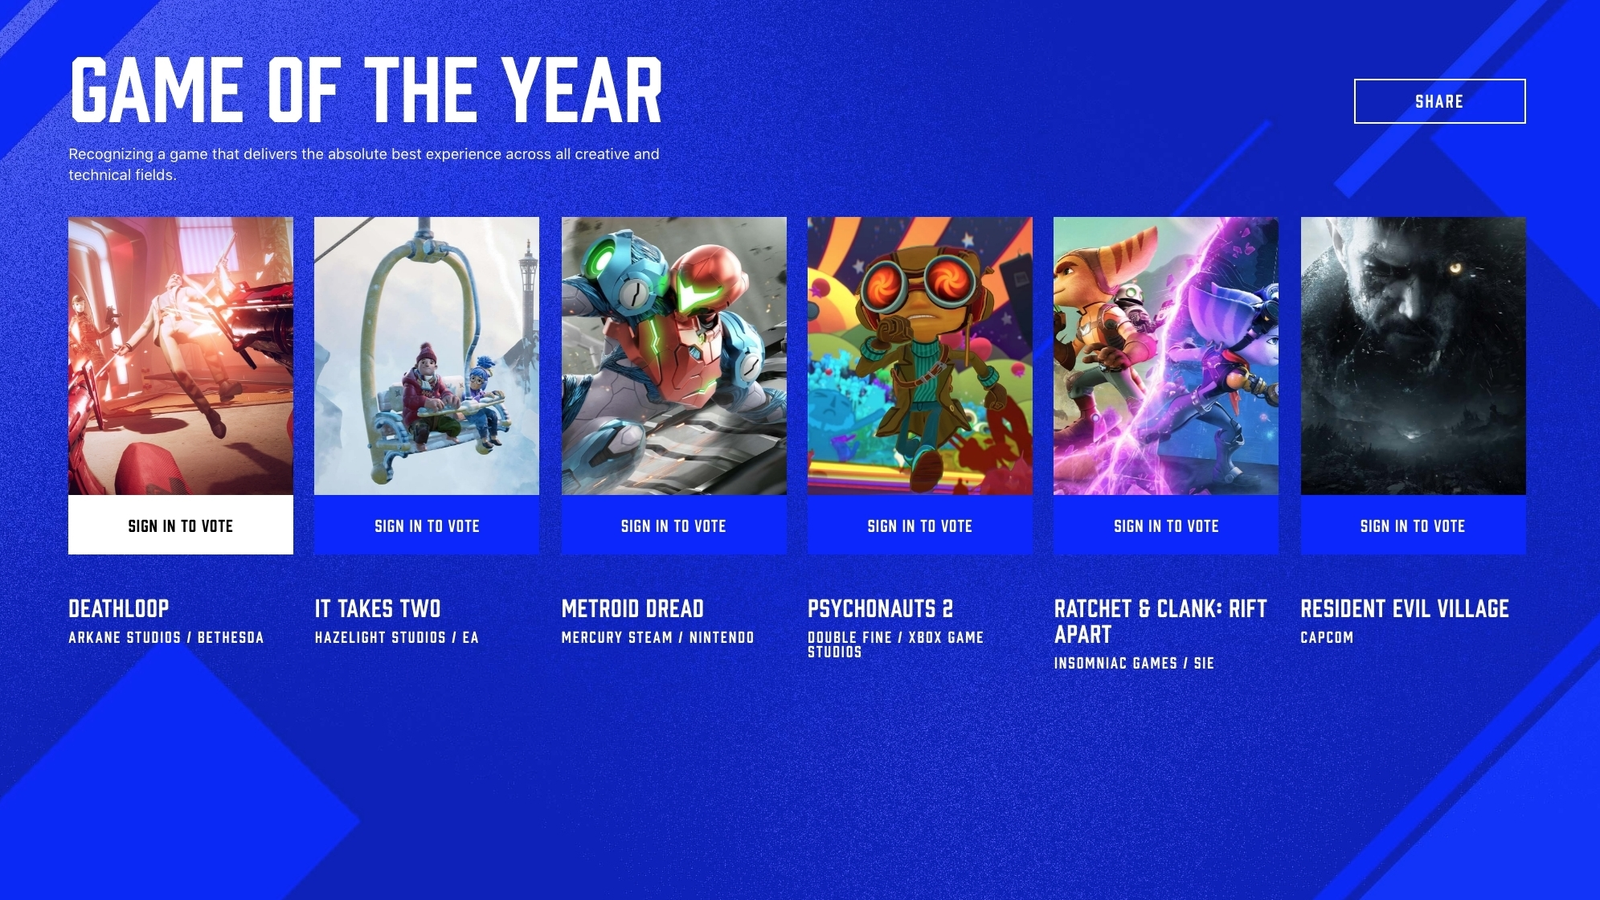 The Game Awards Returns With Glitz and an Industry Asserting Its